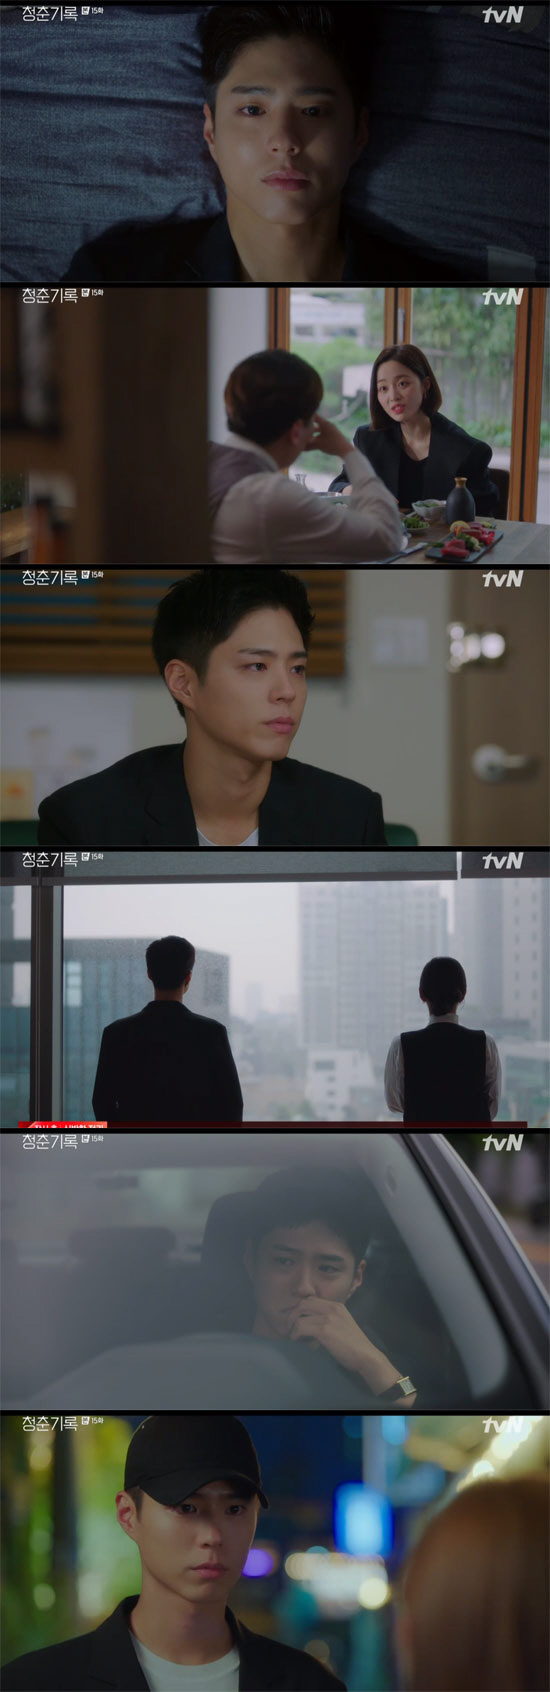 Park Bo-gum has been in a fever since parting ways with Park So-dam.In the TVN Monday drama Record of Youth broadcast on the 26th, the images of Park Bo-gum and Park So-dam of the breakup crisis were drawn.Lee Tae-soo (Lee Chang-hoon), a former agency representative who is aiming for Sa Hye-joon, said to Lee Min-jae (Shin Dong-mi), I am going to get it if I get back.I will accept the company even Minjae, he said. Do you think Hyejun will know Minjaes ball? Sa Hye-joon was angry at Lee Min-jaes article denying his enthusiasm for Ahn Jung-ha, and Lee Min-jae confronted him with the position that protecting you with a manager is a priority.Hye Jun and I are sticky to Lee Tae-soo, but the relationship between the two became a little bit dangerous.Sa Hye-joon presented shoes with his own paintings. The relationship with Sa Hye-joon to a stable mother is not a relationship.I am a customer, but I was disappointed again when I saw my mother who showed a snobbish appearance after seeing a shoe gift.Kim Min-jae once again persuaded him to release Charlies message of justice, but Sa Hye-joon said, I can still hold on.However, he said, I cry every night, not everything I see.I decided to stabilize and met Sa Hye-joon. Sa Hye-joon said, Im going to rest now like you said. I kept working. I was nervous.I love you, lets break up. Remember when you love me, youll never say Im sorry?You know how many times I said sorry when I met you? Every time you say sorry, I think youre going to be hard.I will not do it anymore until your Feeling, he said. I will go back to my daily life before I love you. Kim Su-man learned Lee Tae-soos realities from Jin Ji-a, and Kim Su-man declared, I will smash A-jun, Park Do-ha, I will keep tampering.Lee Min-jae revealed the last letter of Charlie Jung through Kim Soo-man in the end of the repeated deterioration of public opinion. Sa Hye-joon, who saw it together through entertainment news, said, If you break and refute, there will be another controversy.Lee Min-jae said, I thought it was the best Choices. It is still before the contract. I will accept whatever Choices you do.Jae-joon decided to agree with Kim Soo-man. Jin Ji-a, who met An Ji-ha, told Sa Hye-joon, You will be recorded as the most beautiful and shining moment in my youth.Goodbye, heartily, he said.Sa Hye-joon has been thinking about many sorry that he has done to An Jeong-ha. After that, Sa Hye-joon, who visited An Jeong-ha, said, I can not break up with you.